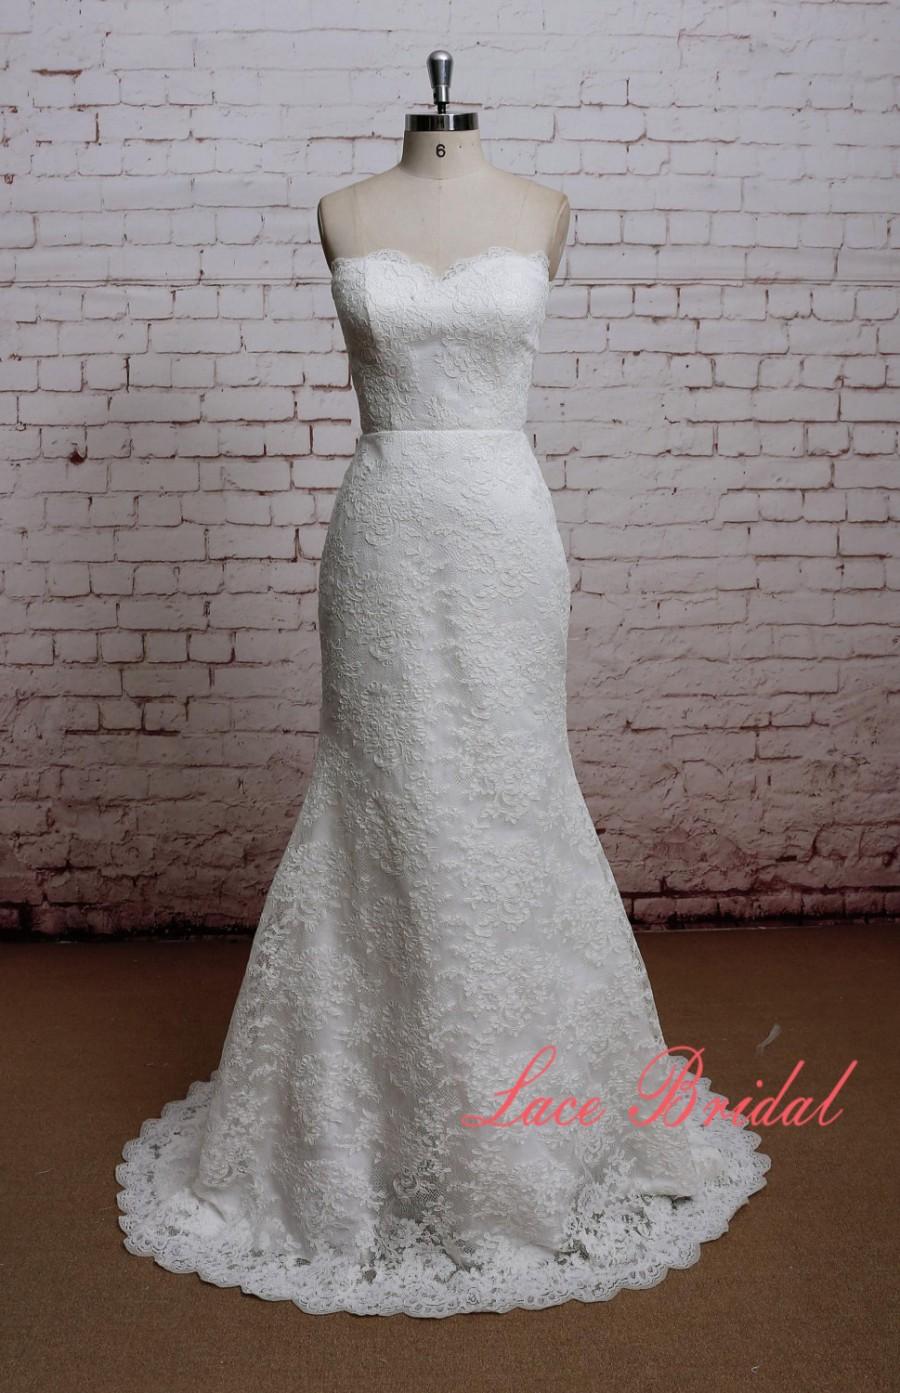 Mariage - New Style Wedding Dress Mermaid Style Bridal Gown Classic Lace Wedding Gown Full Lace Skirt Dress